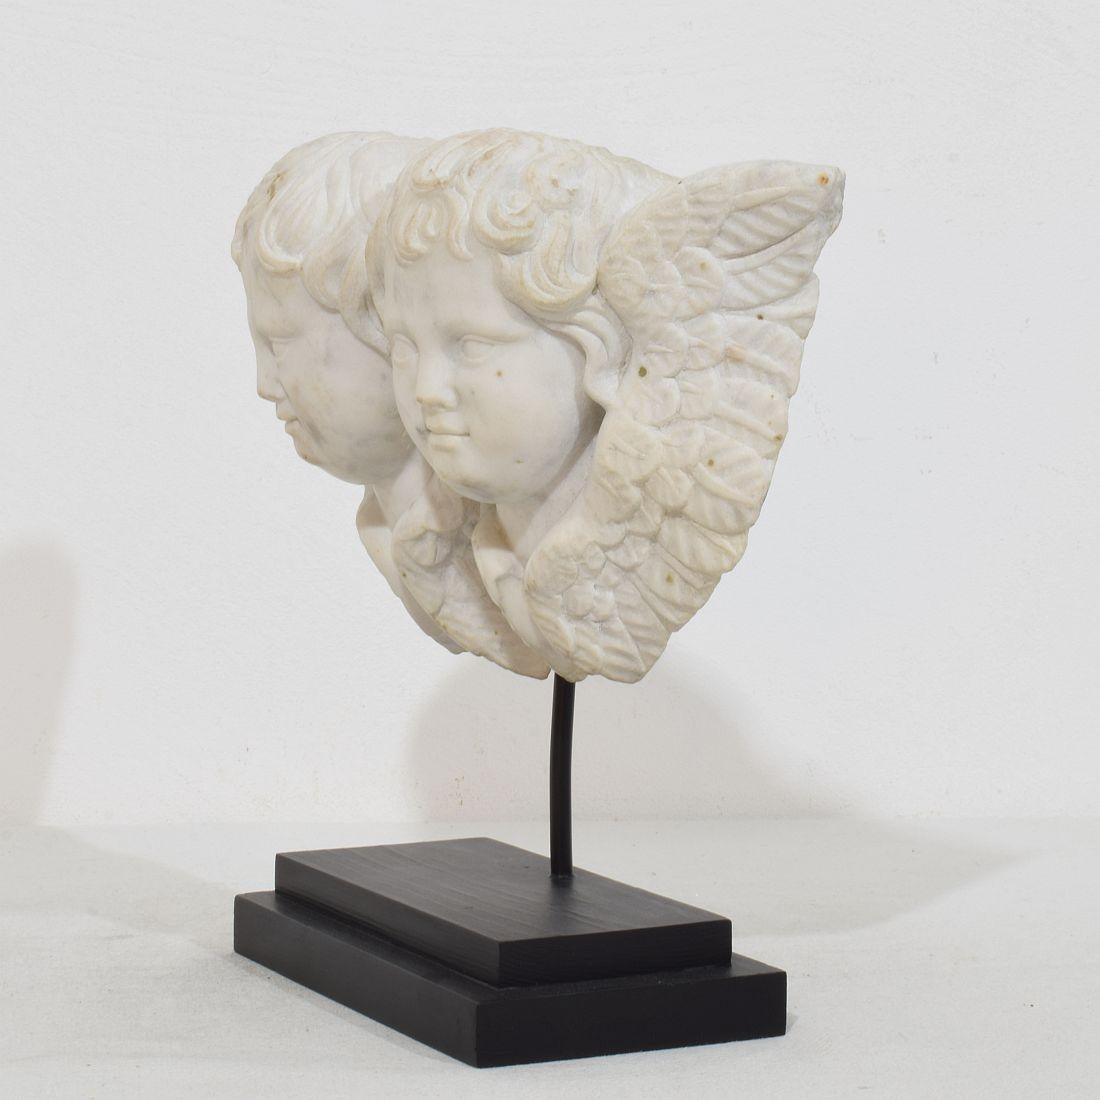 Italian, 18th Century Carved White Marble Winged Double Angel Head Ornament For Sale 2